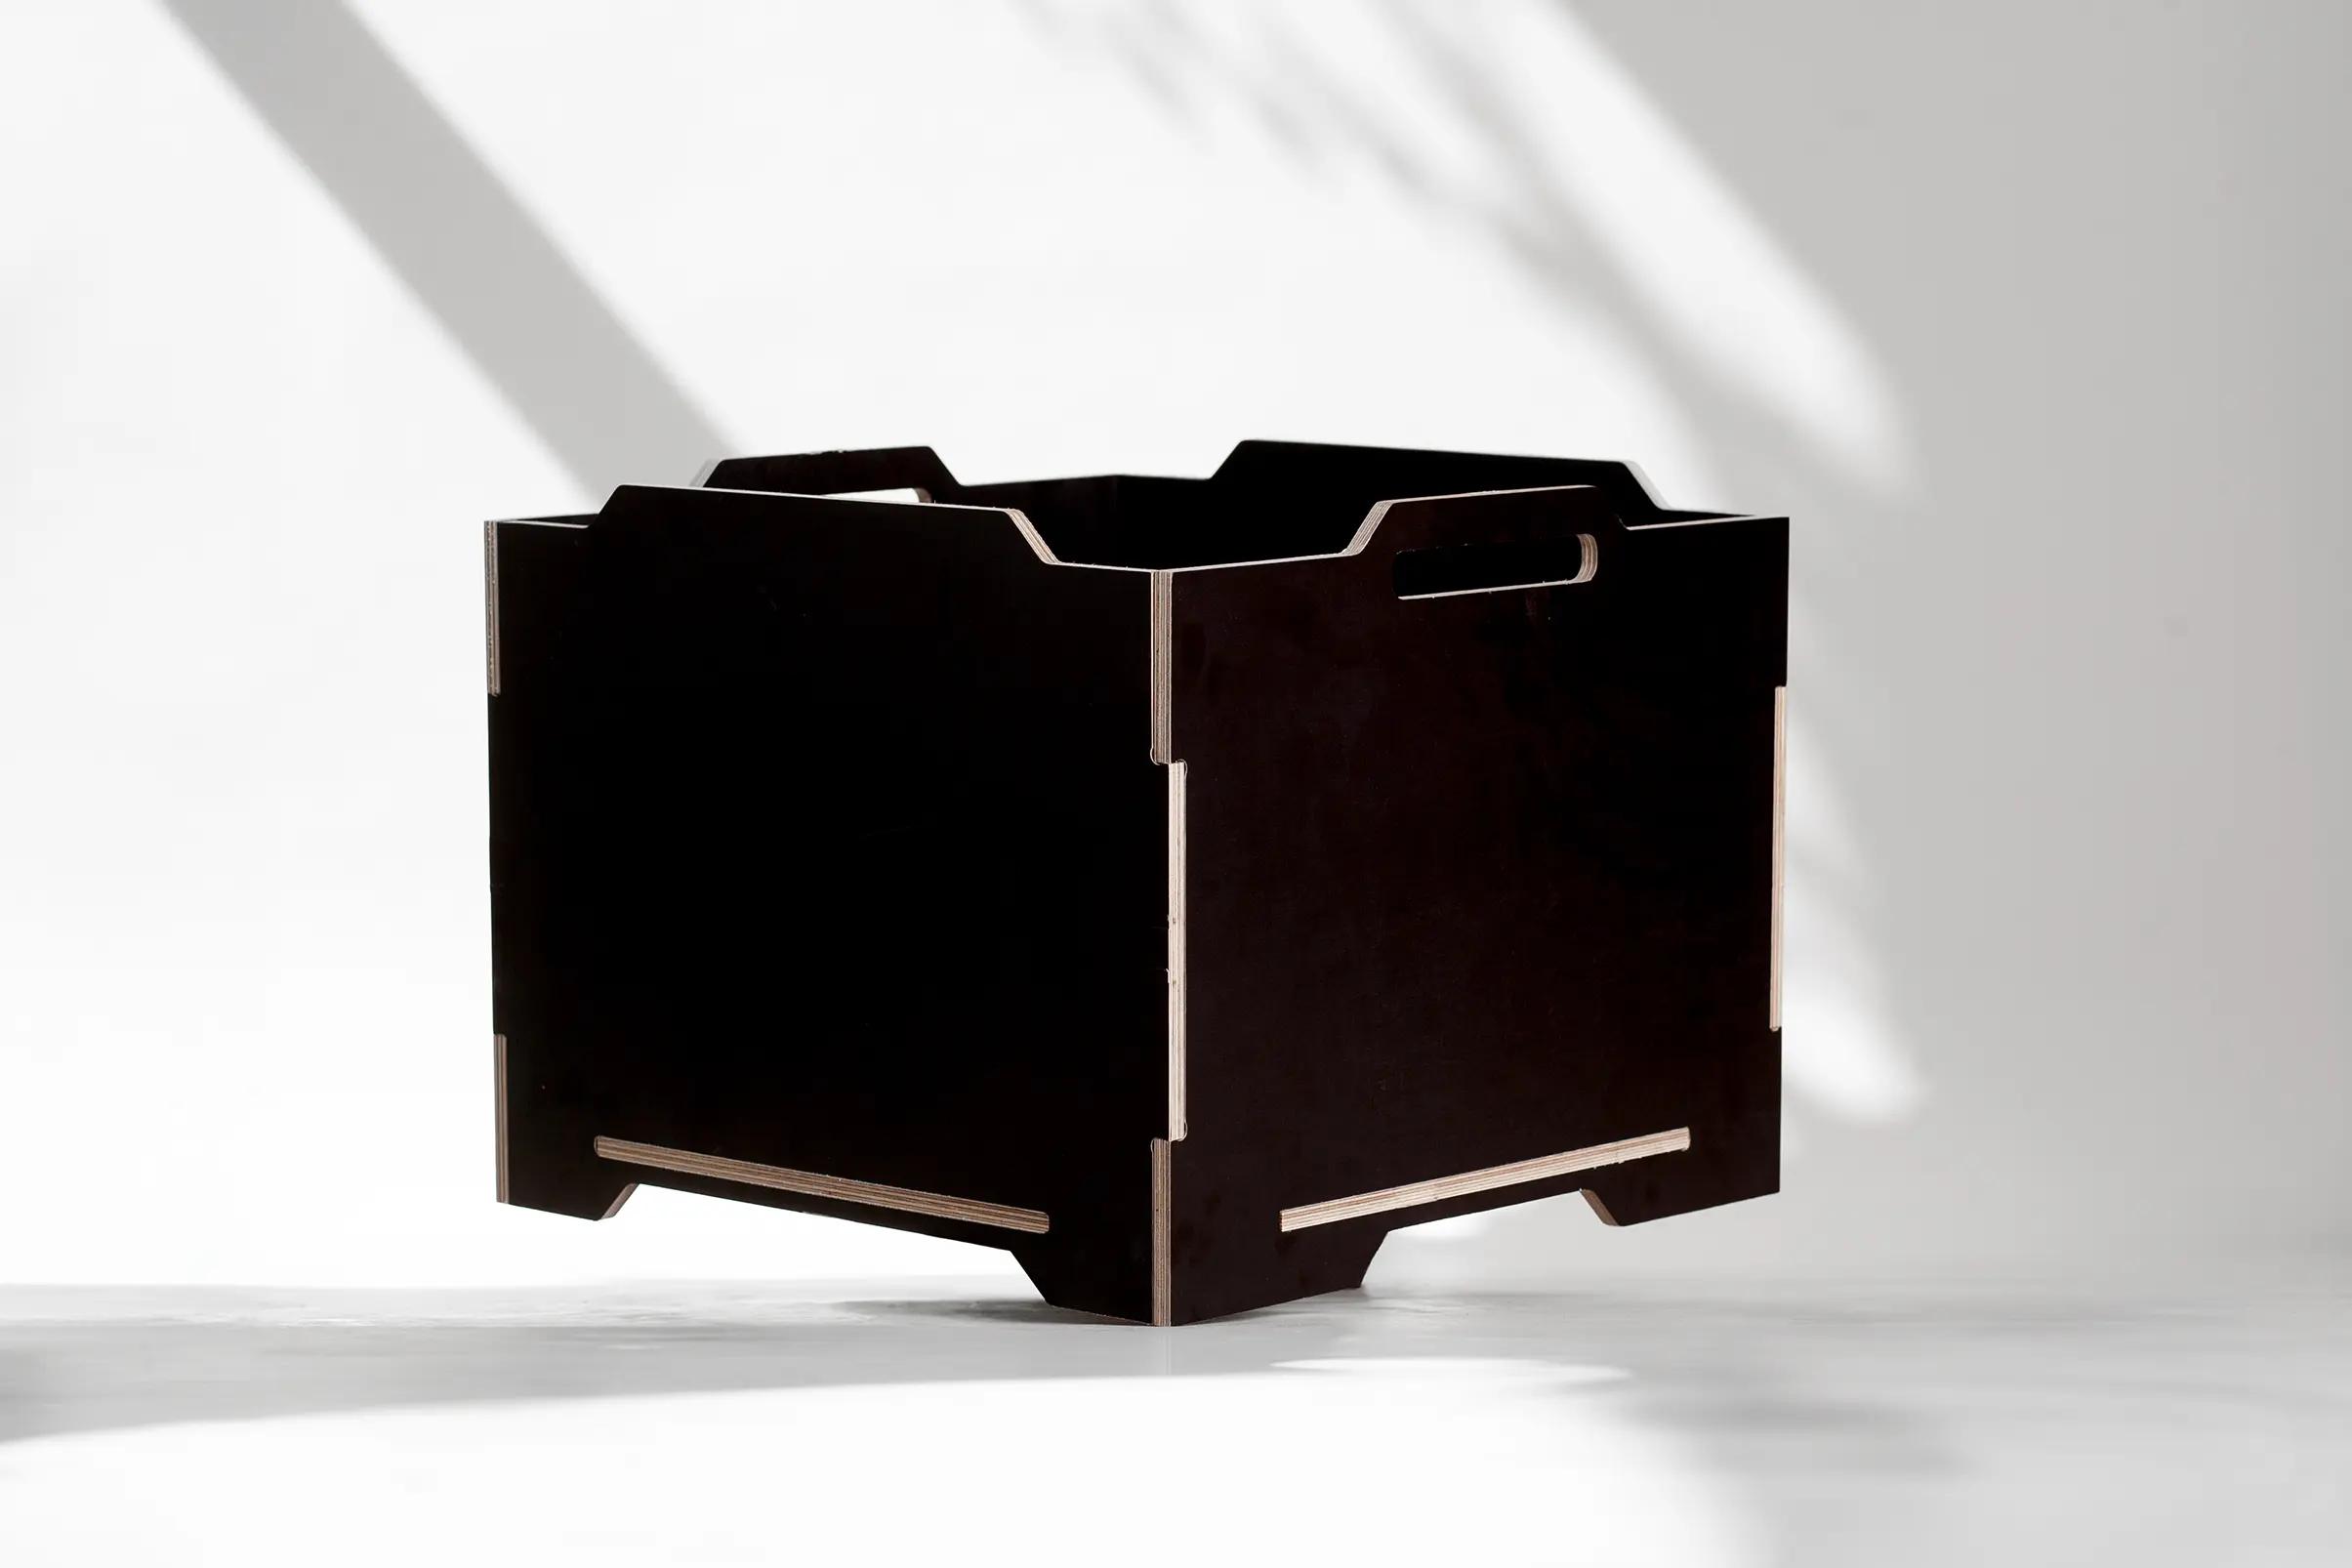 The parametric product "OpenBox" - a simple but stylish wooden box.